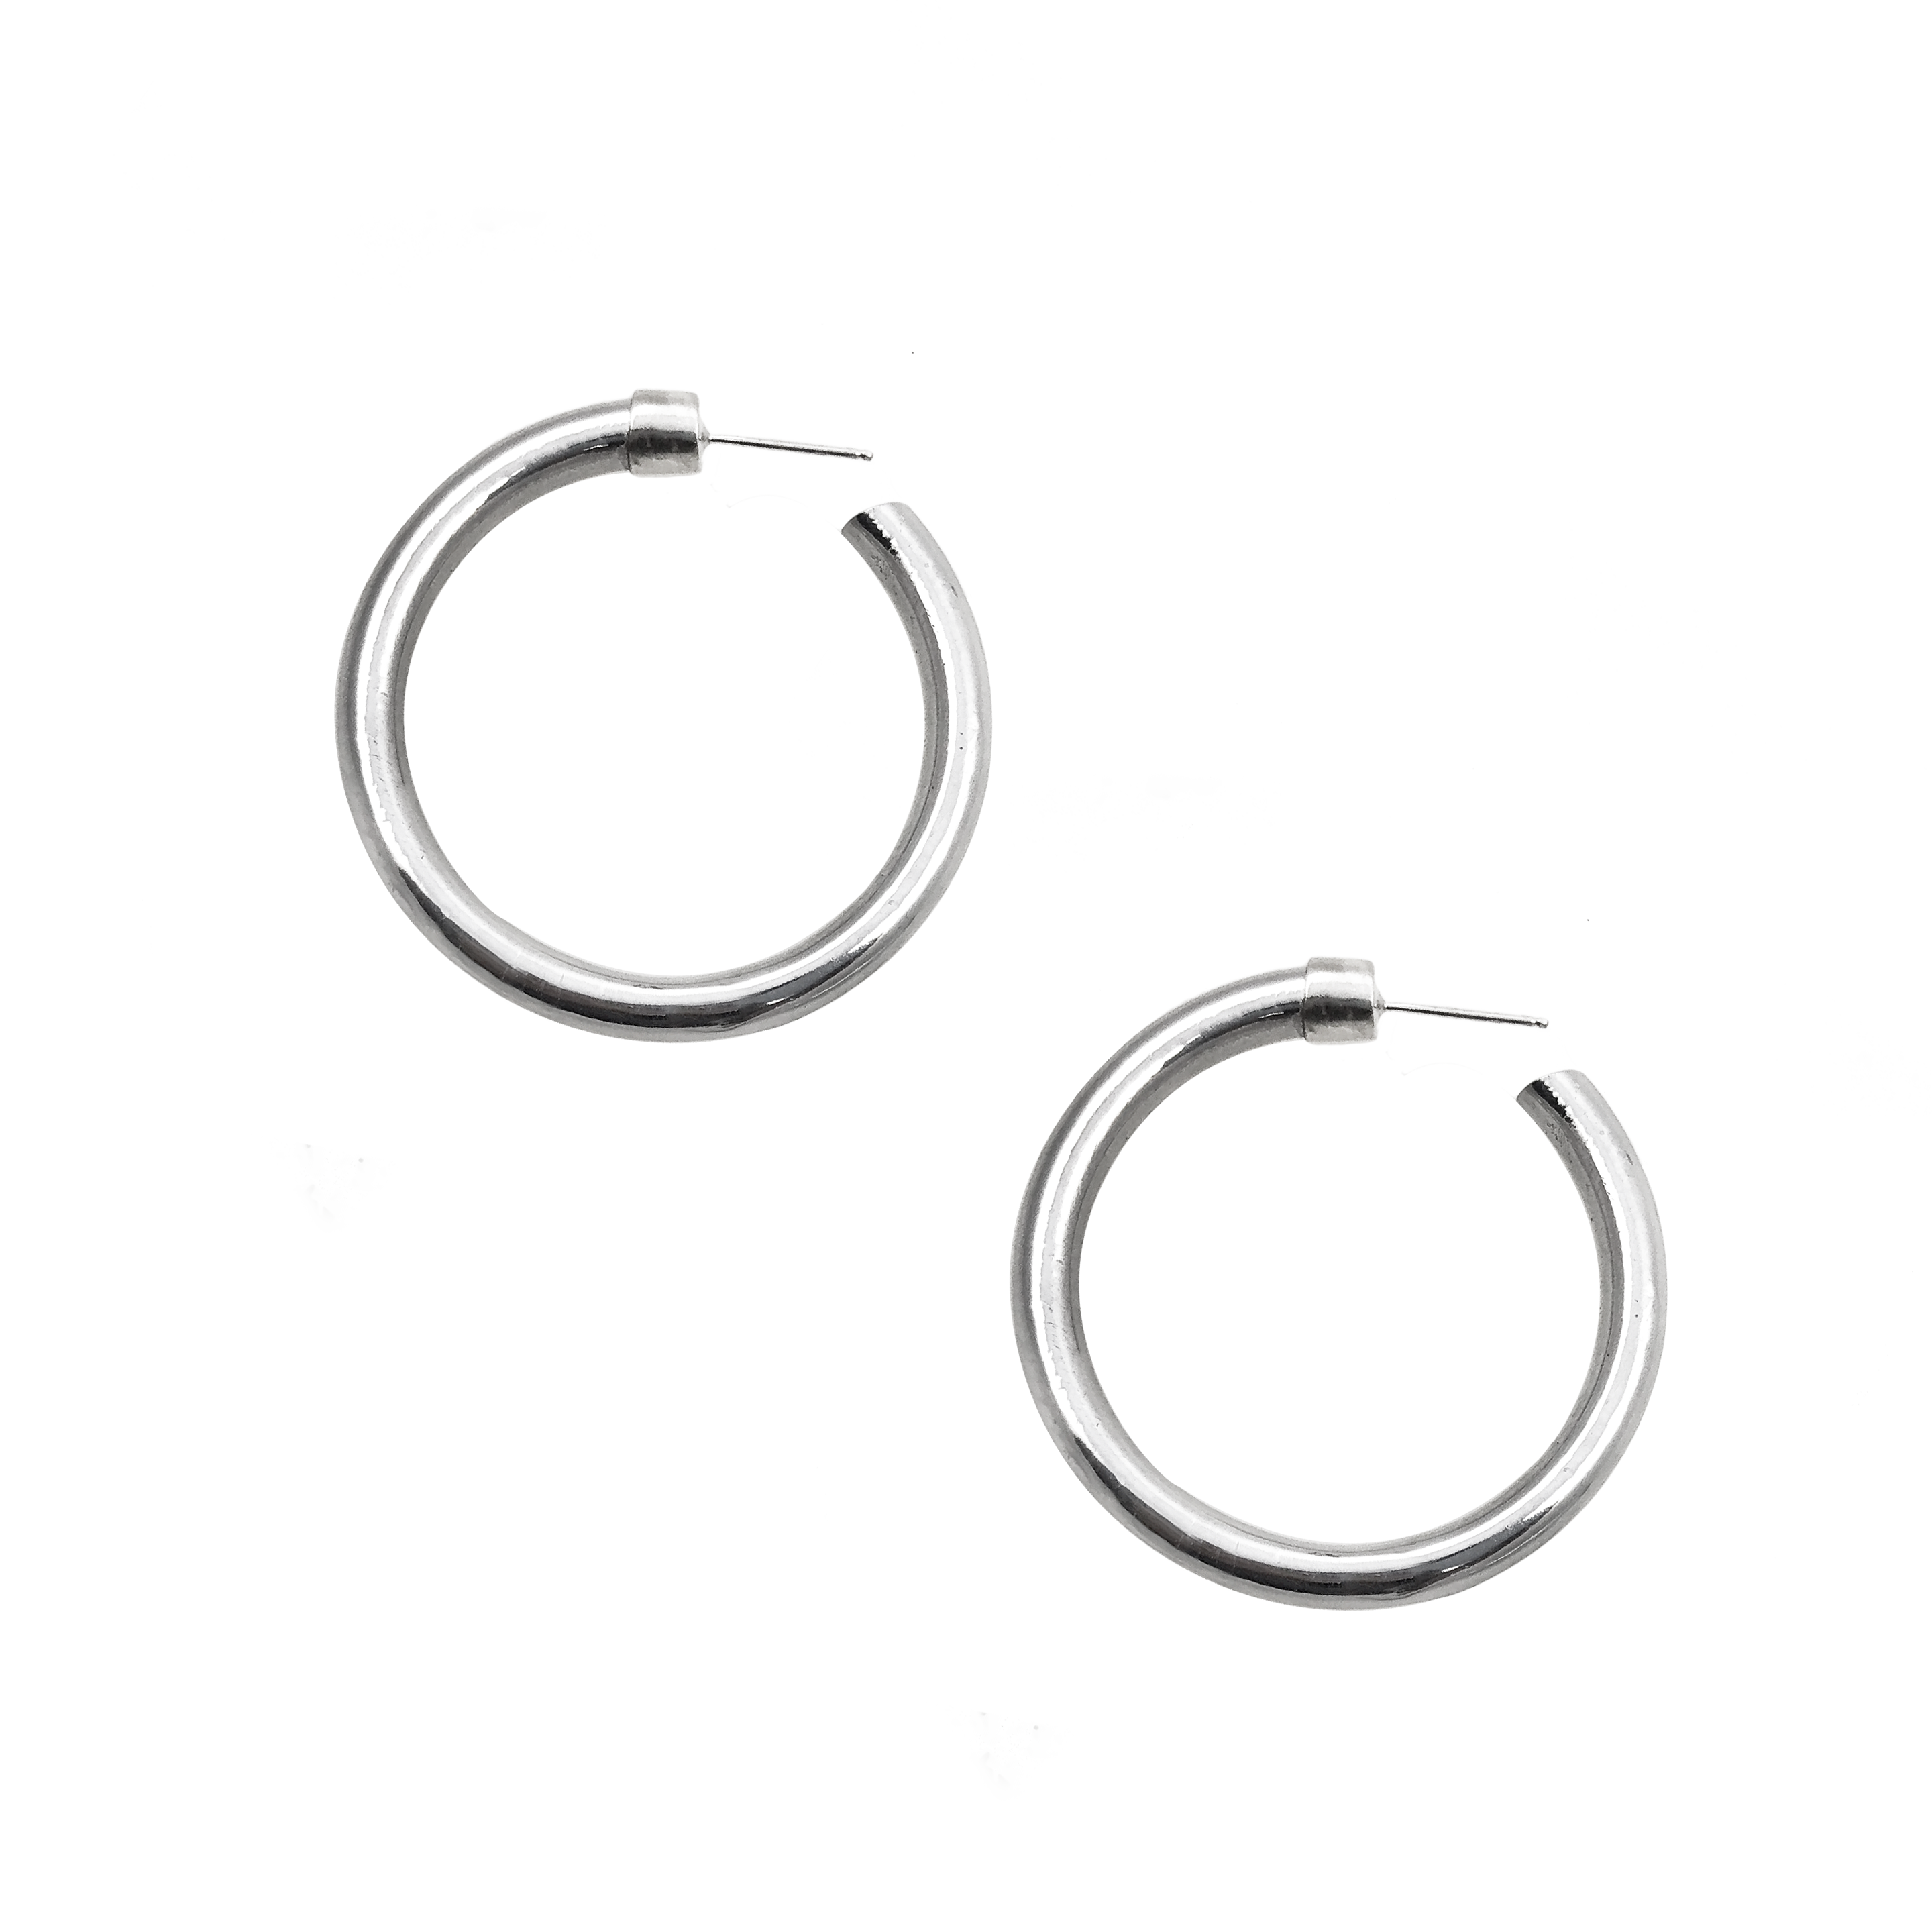 The Virtuous Circle Large Hoops - Minimalist elegance that aligns with your values.